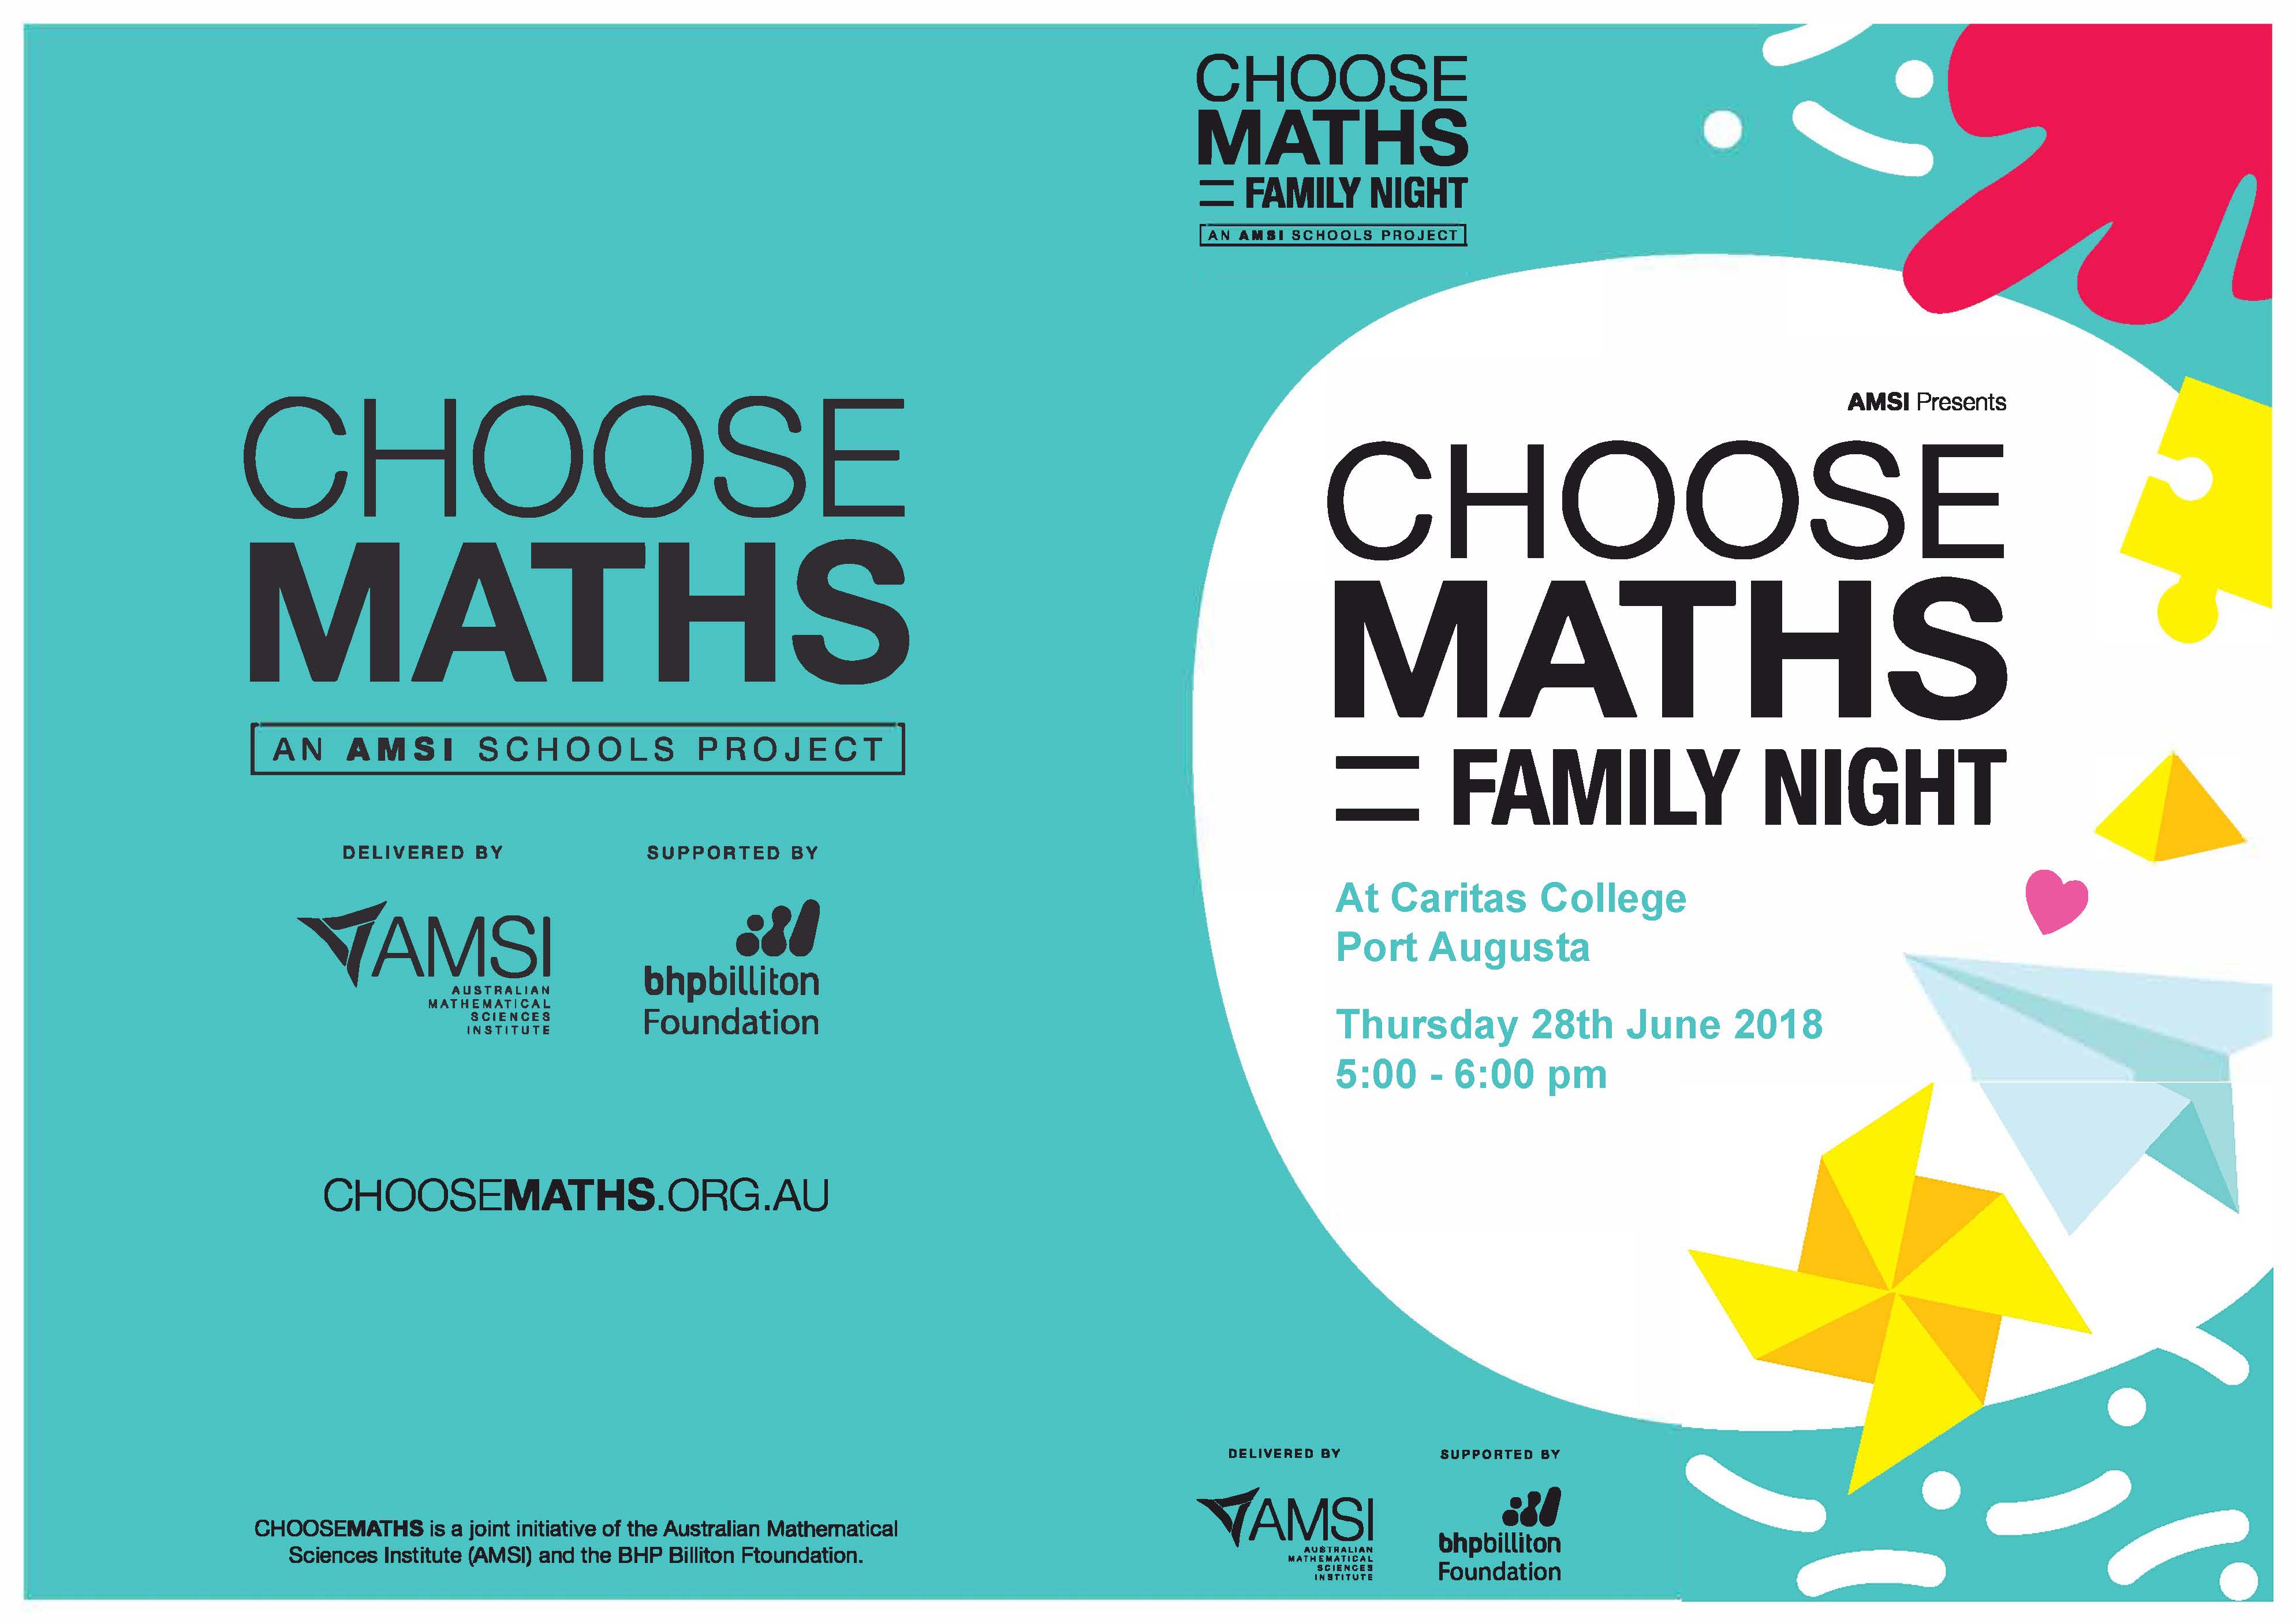 Family_Maths_Night_Flyer_for_parents_caritas_Page_1.jpg